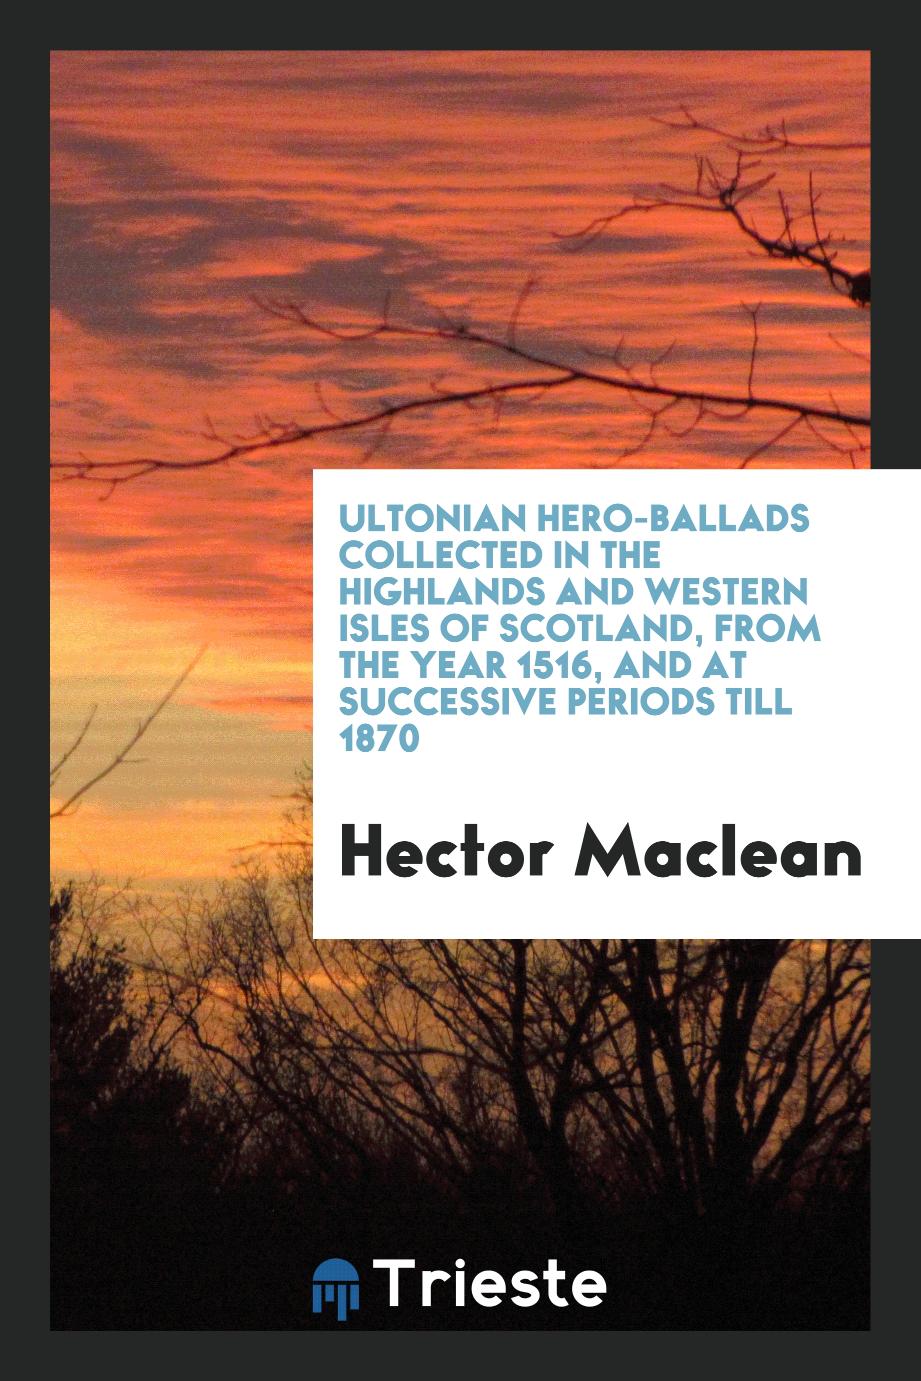 Ultonian Hero-Ballads Collected in the Highlands and Western Isles of Scotland, from the Year 1516, and at Successive Periods till 1870